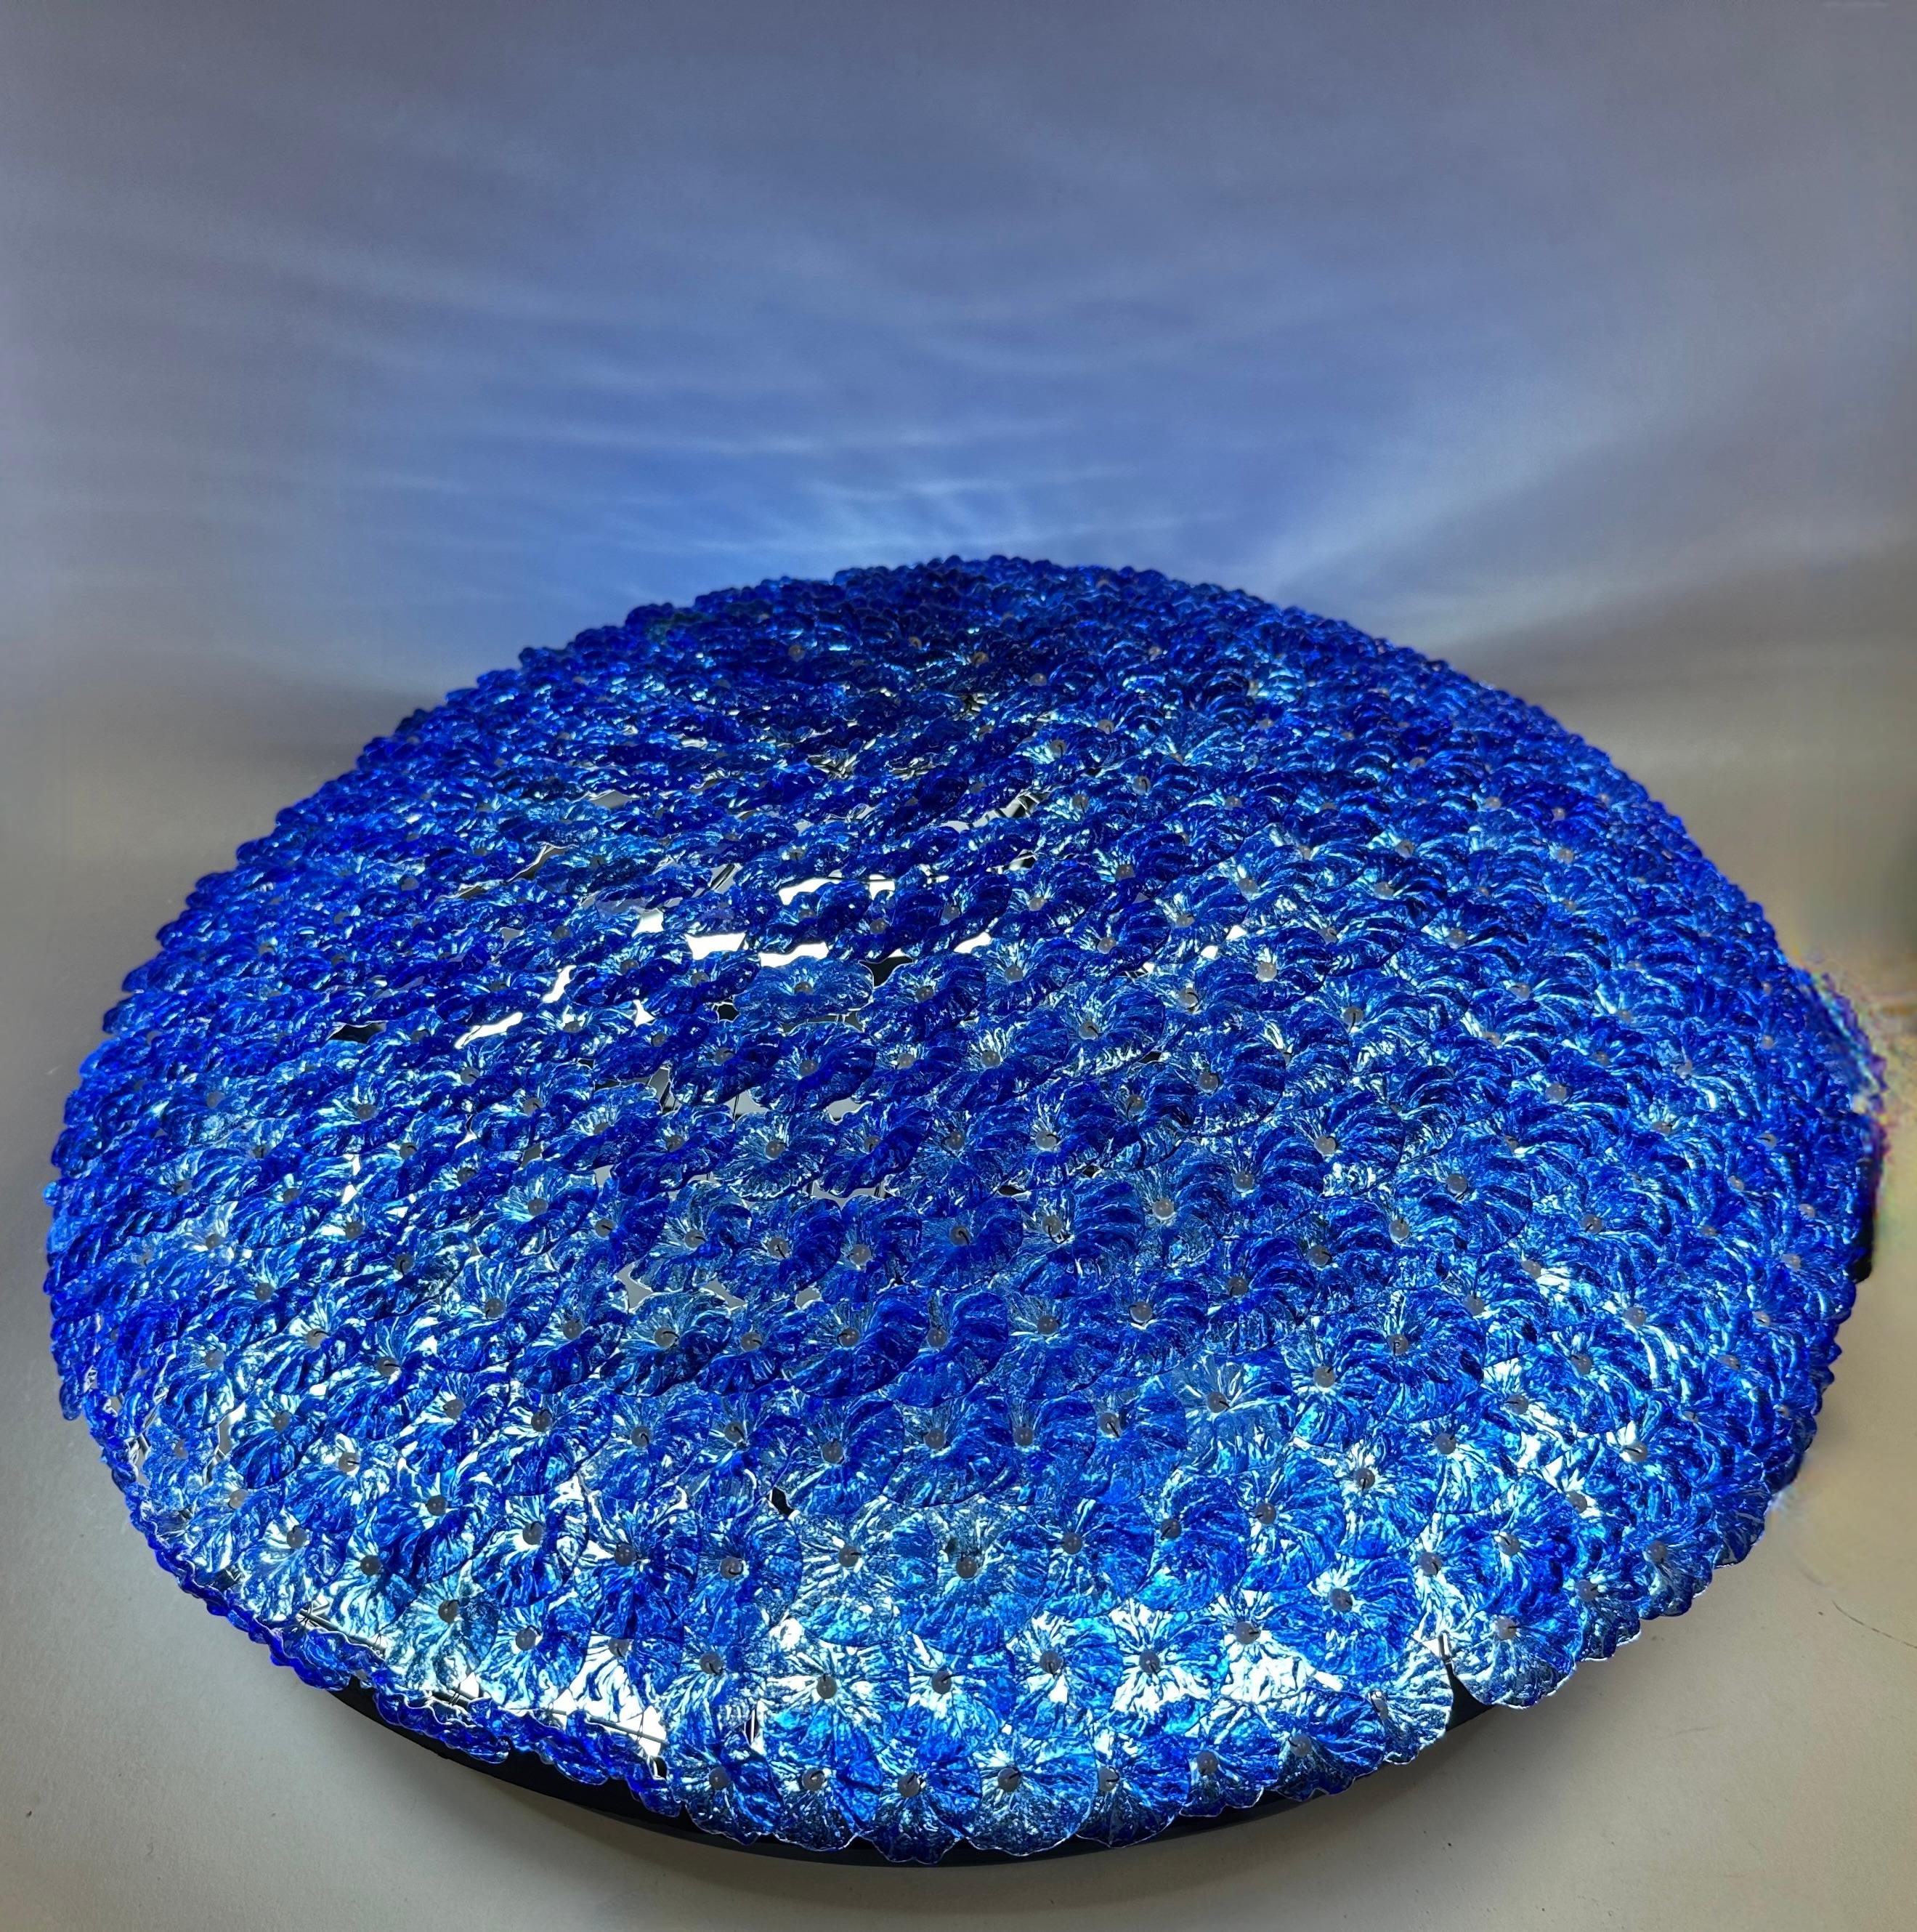 The chandelier is made of blue Murano glass flowers, over a round metal gridded frame. The Fixture requires four European E14 / 110 Volt Candelabra bulbs, each bulb up to 60 watts. It is translucent and gives off a beautiful warm bluish light when